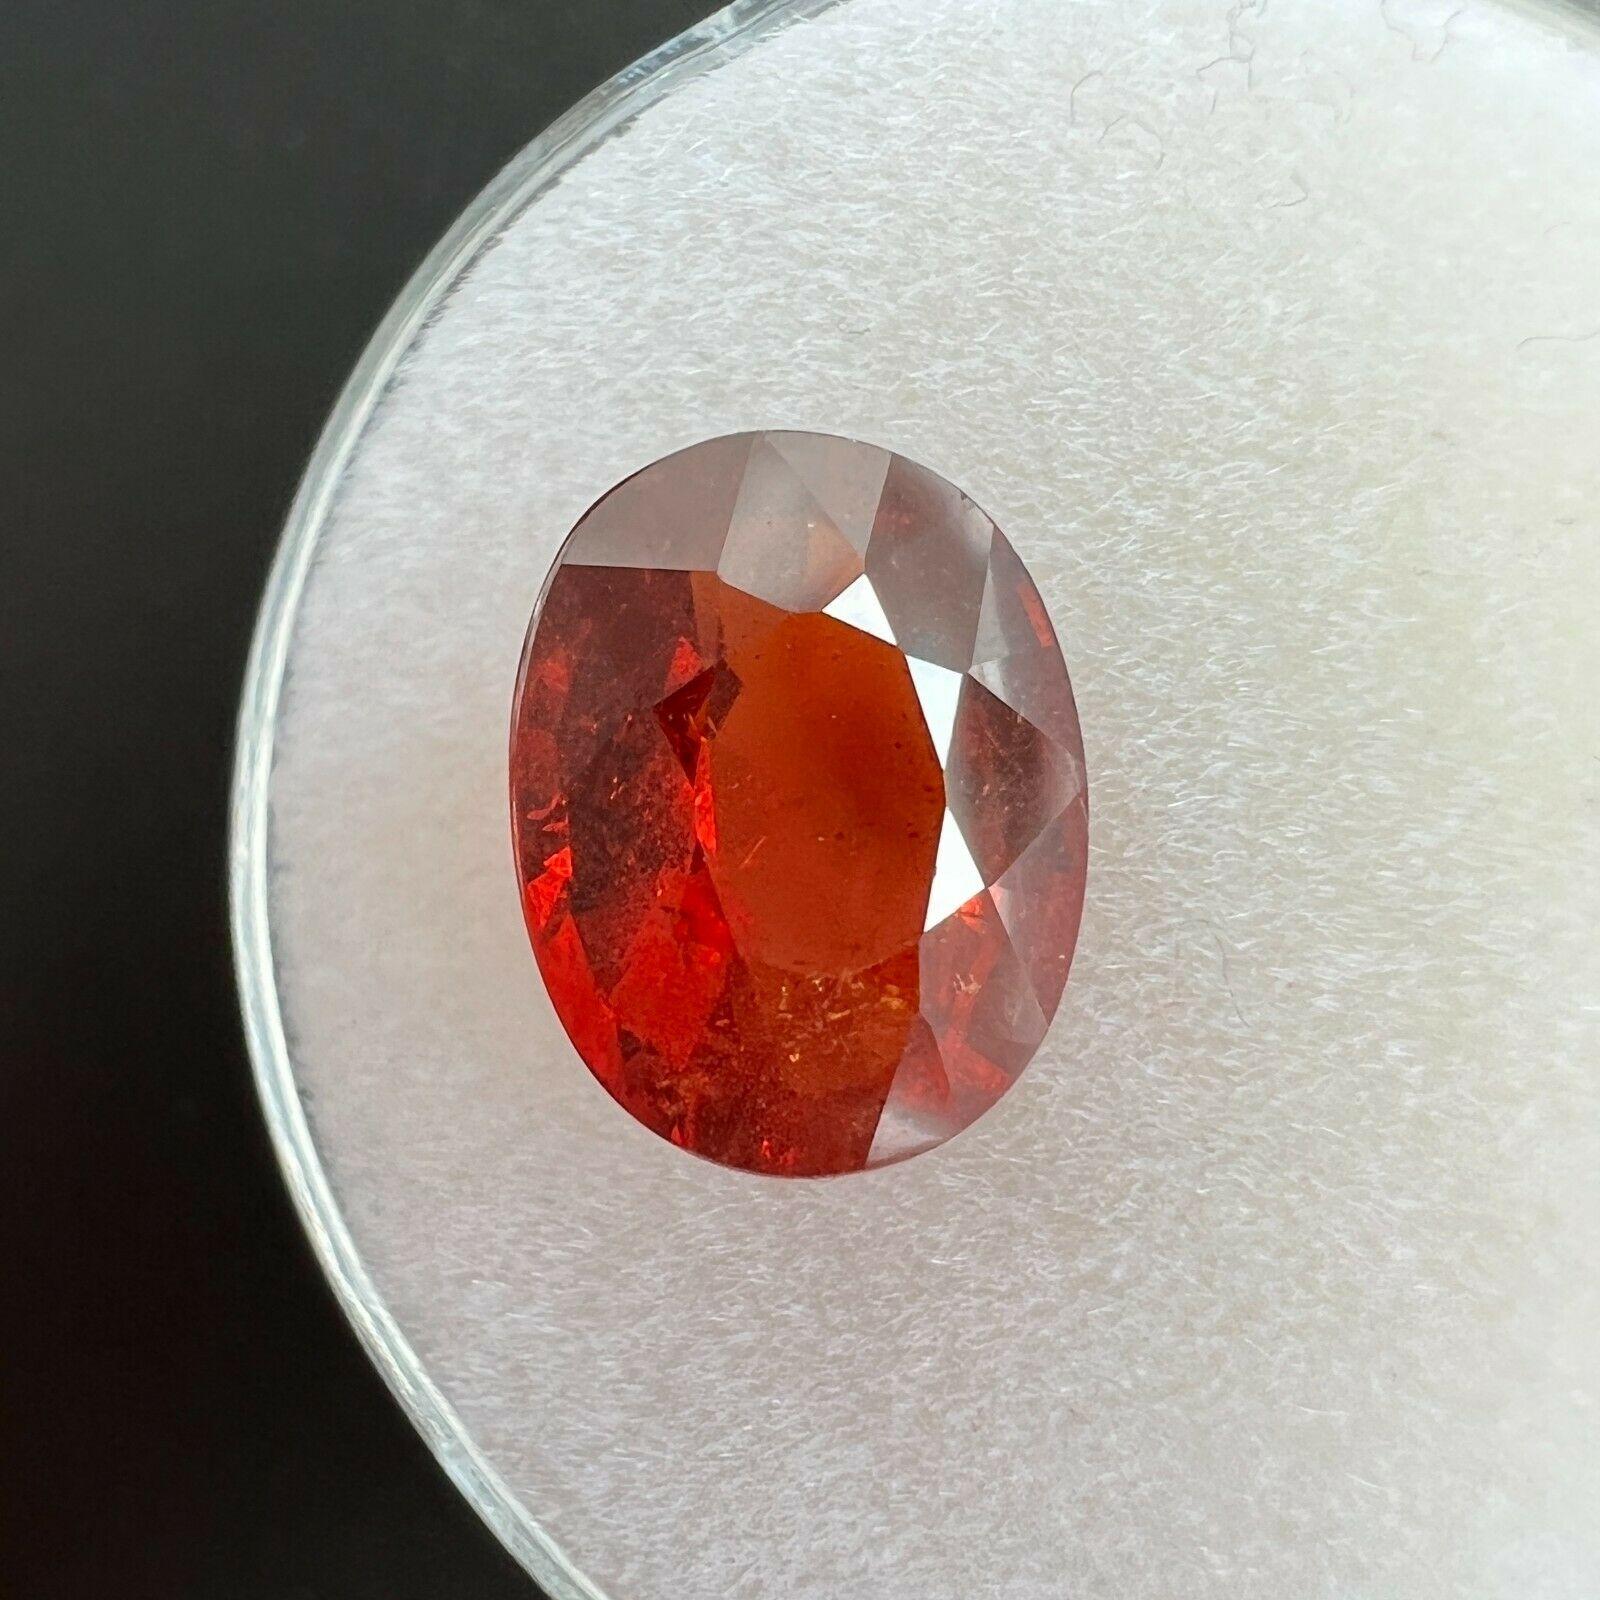 3.28ct Vivid Orange Spessartine Garnet Oval Cut Loose Gem 9.7 x 7.5mm

Fine Natural Spessartine Garnet Loose Gemstone. 
3.28 Carat with a beautiful vivid reddish orange colour and good clarity. Clean stone with only small natural inclusions visible